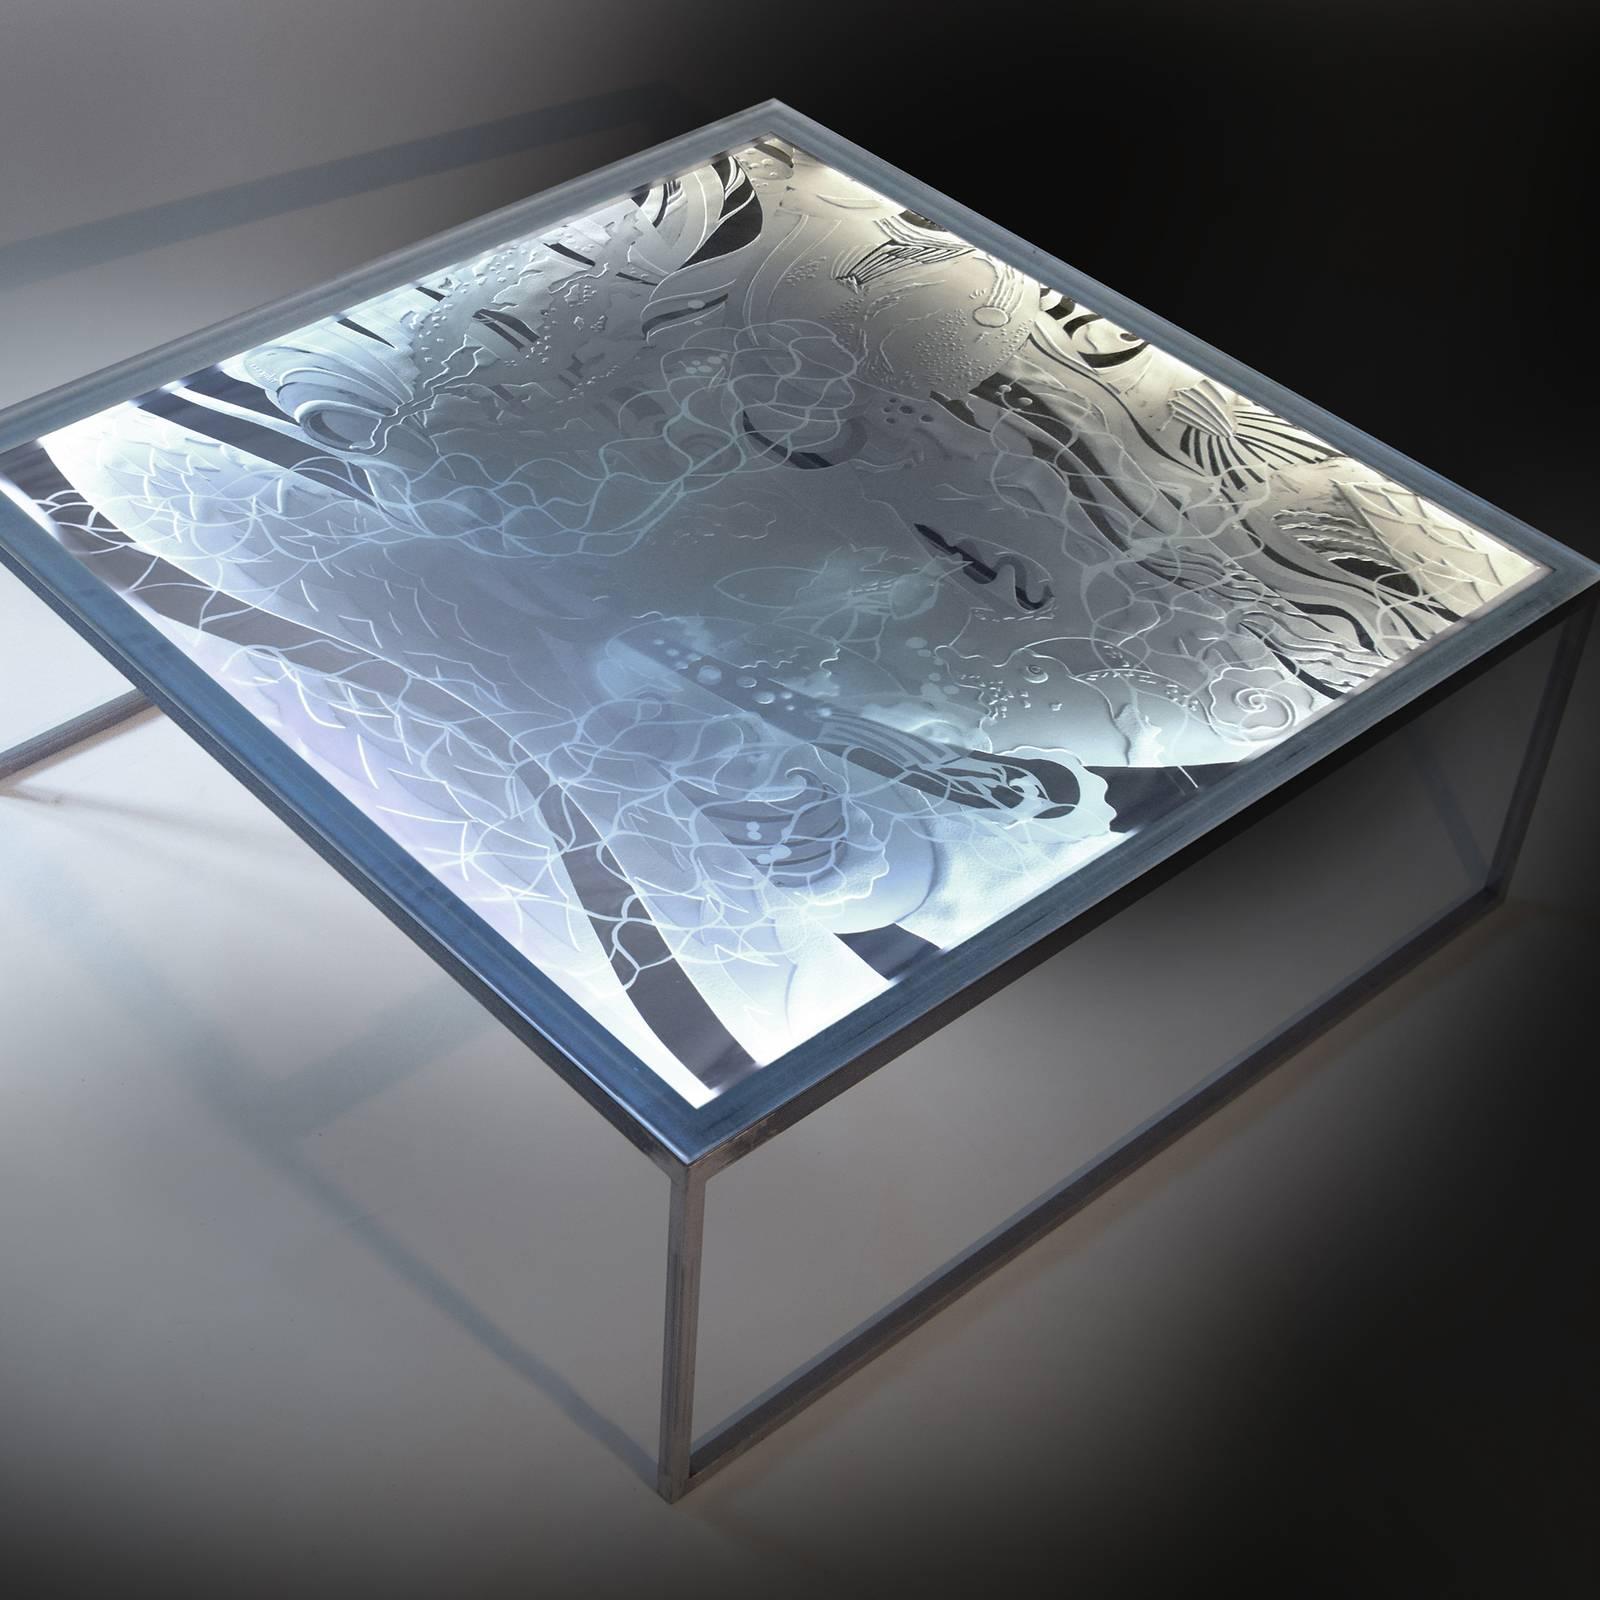 An alluring dance of light and form, this glass table stands out for its originality and fanciful allure. The glass tabletop boasts a marine design in bas-relief achieved exclusively with hand engraving techniques. It is supported by an iron